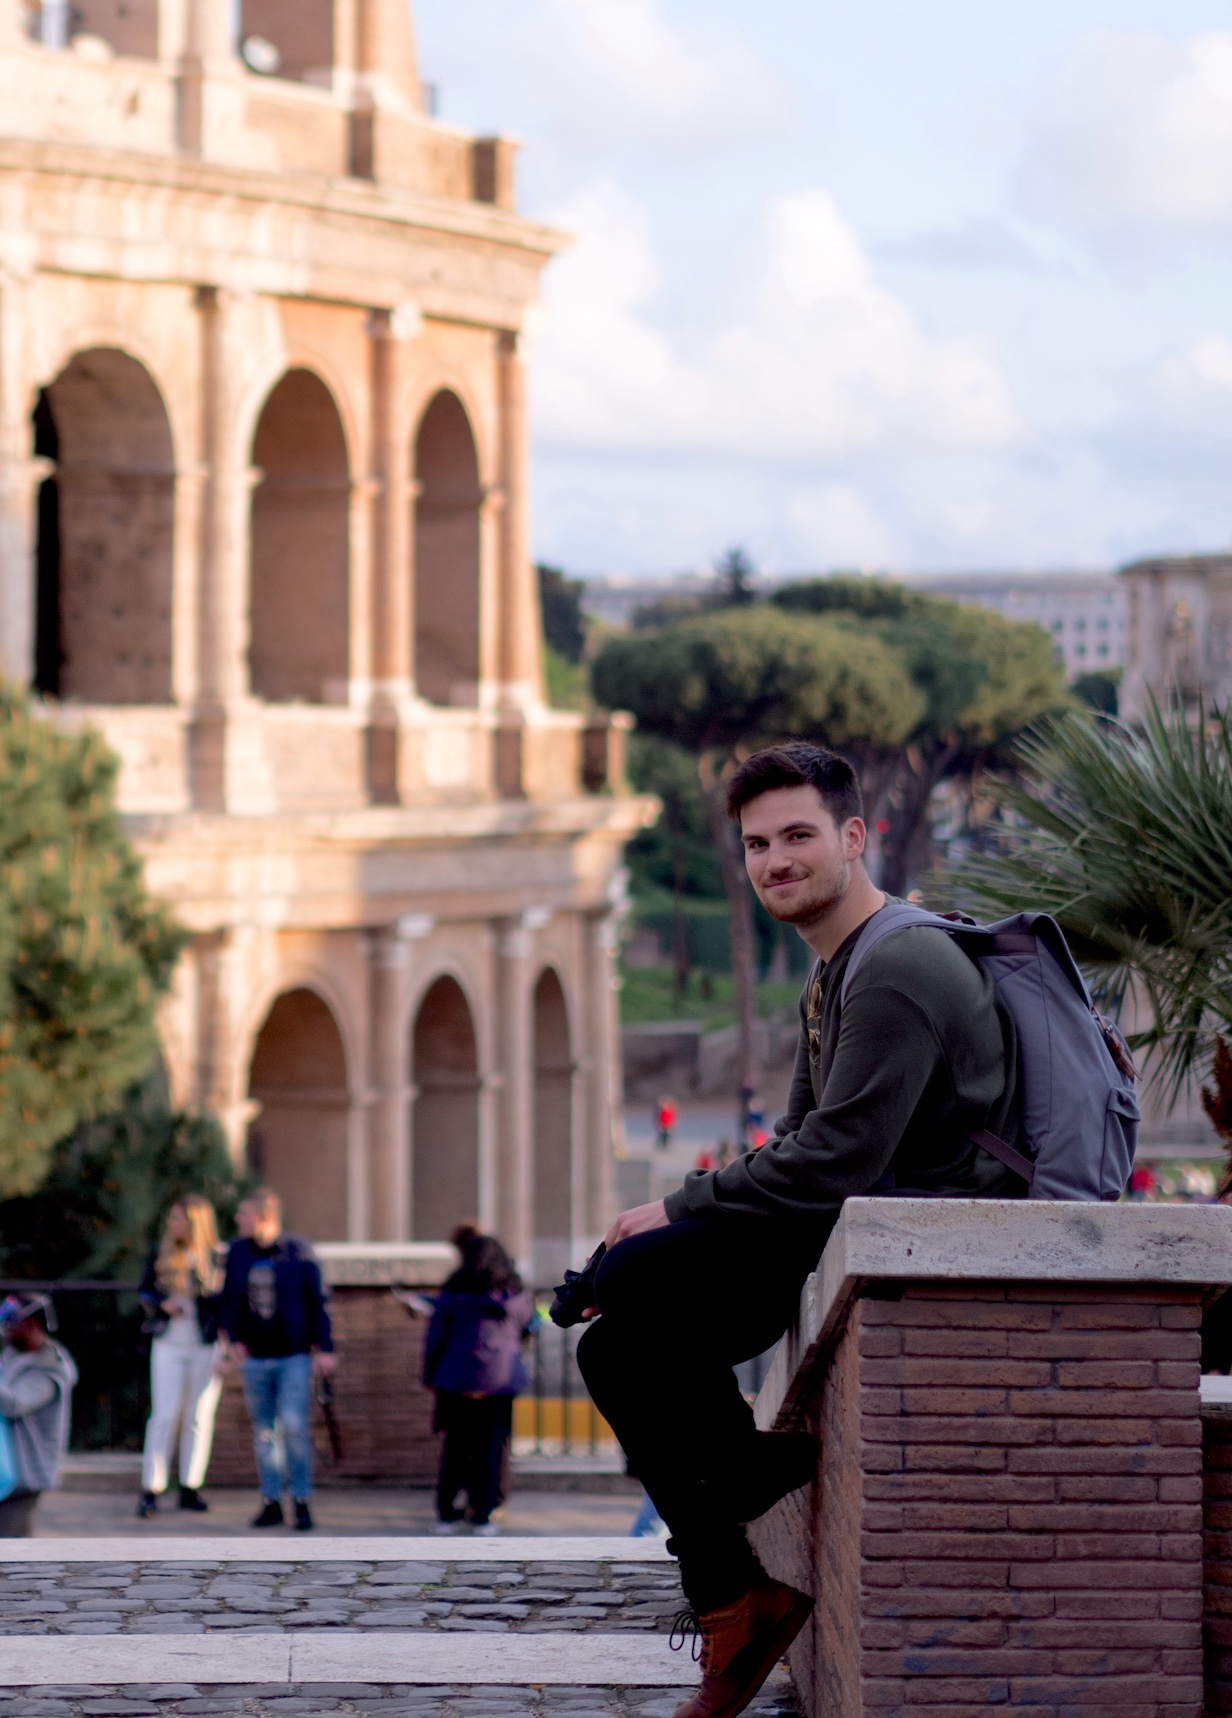 A picture of me in front of the Rome Colosseum